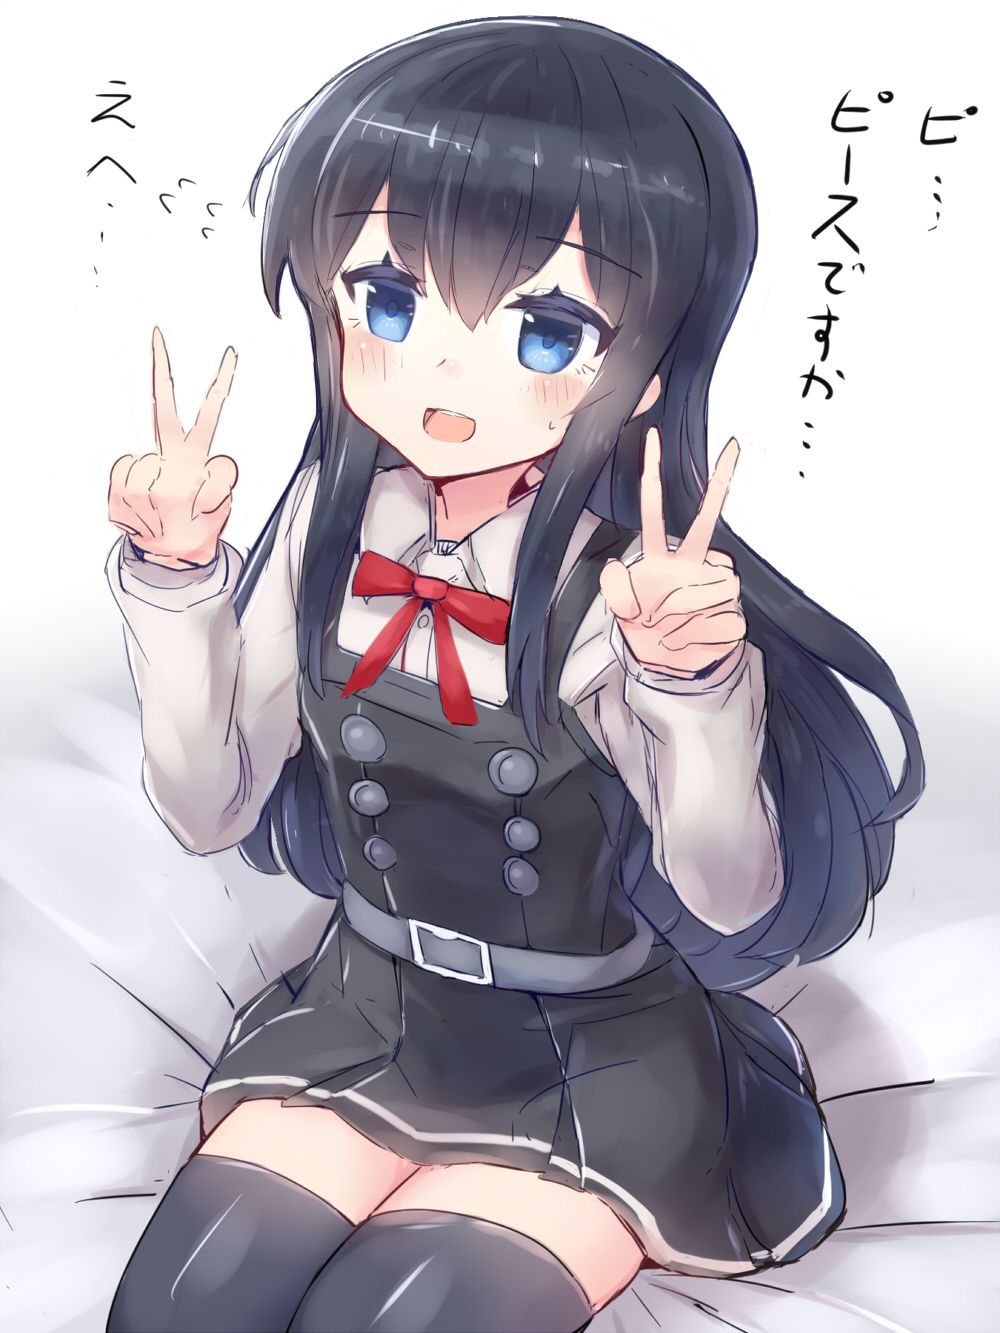 [Secondary, ZIP] pretty serious ship it together images of asashio 100 46